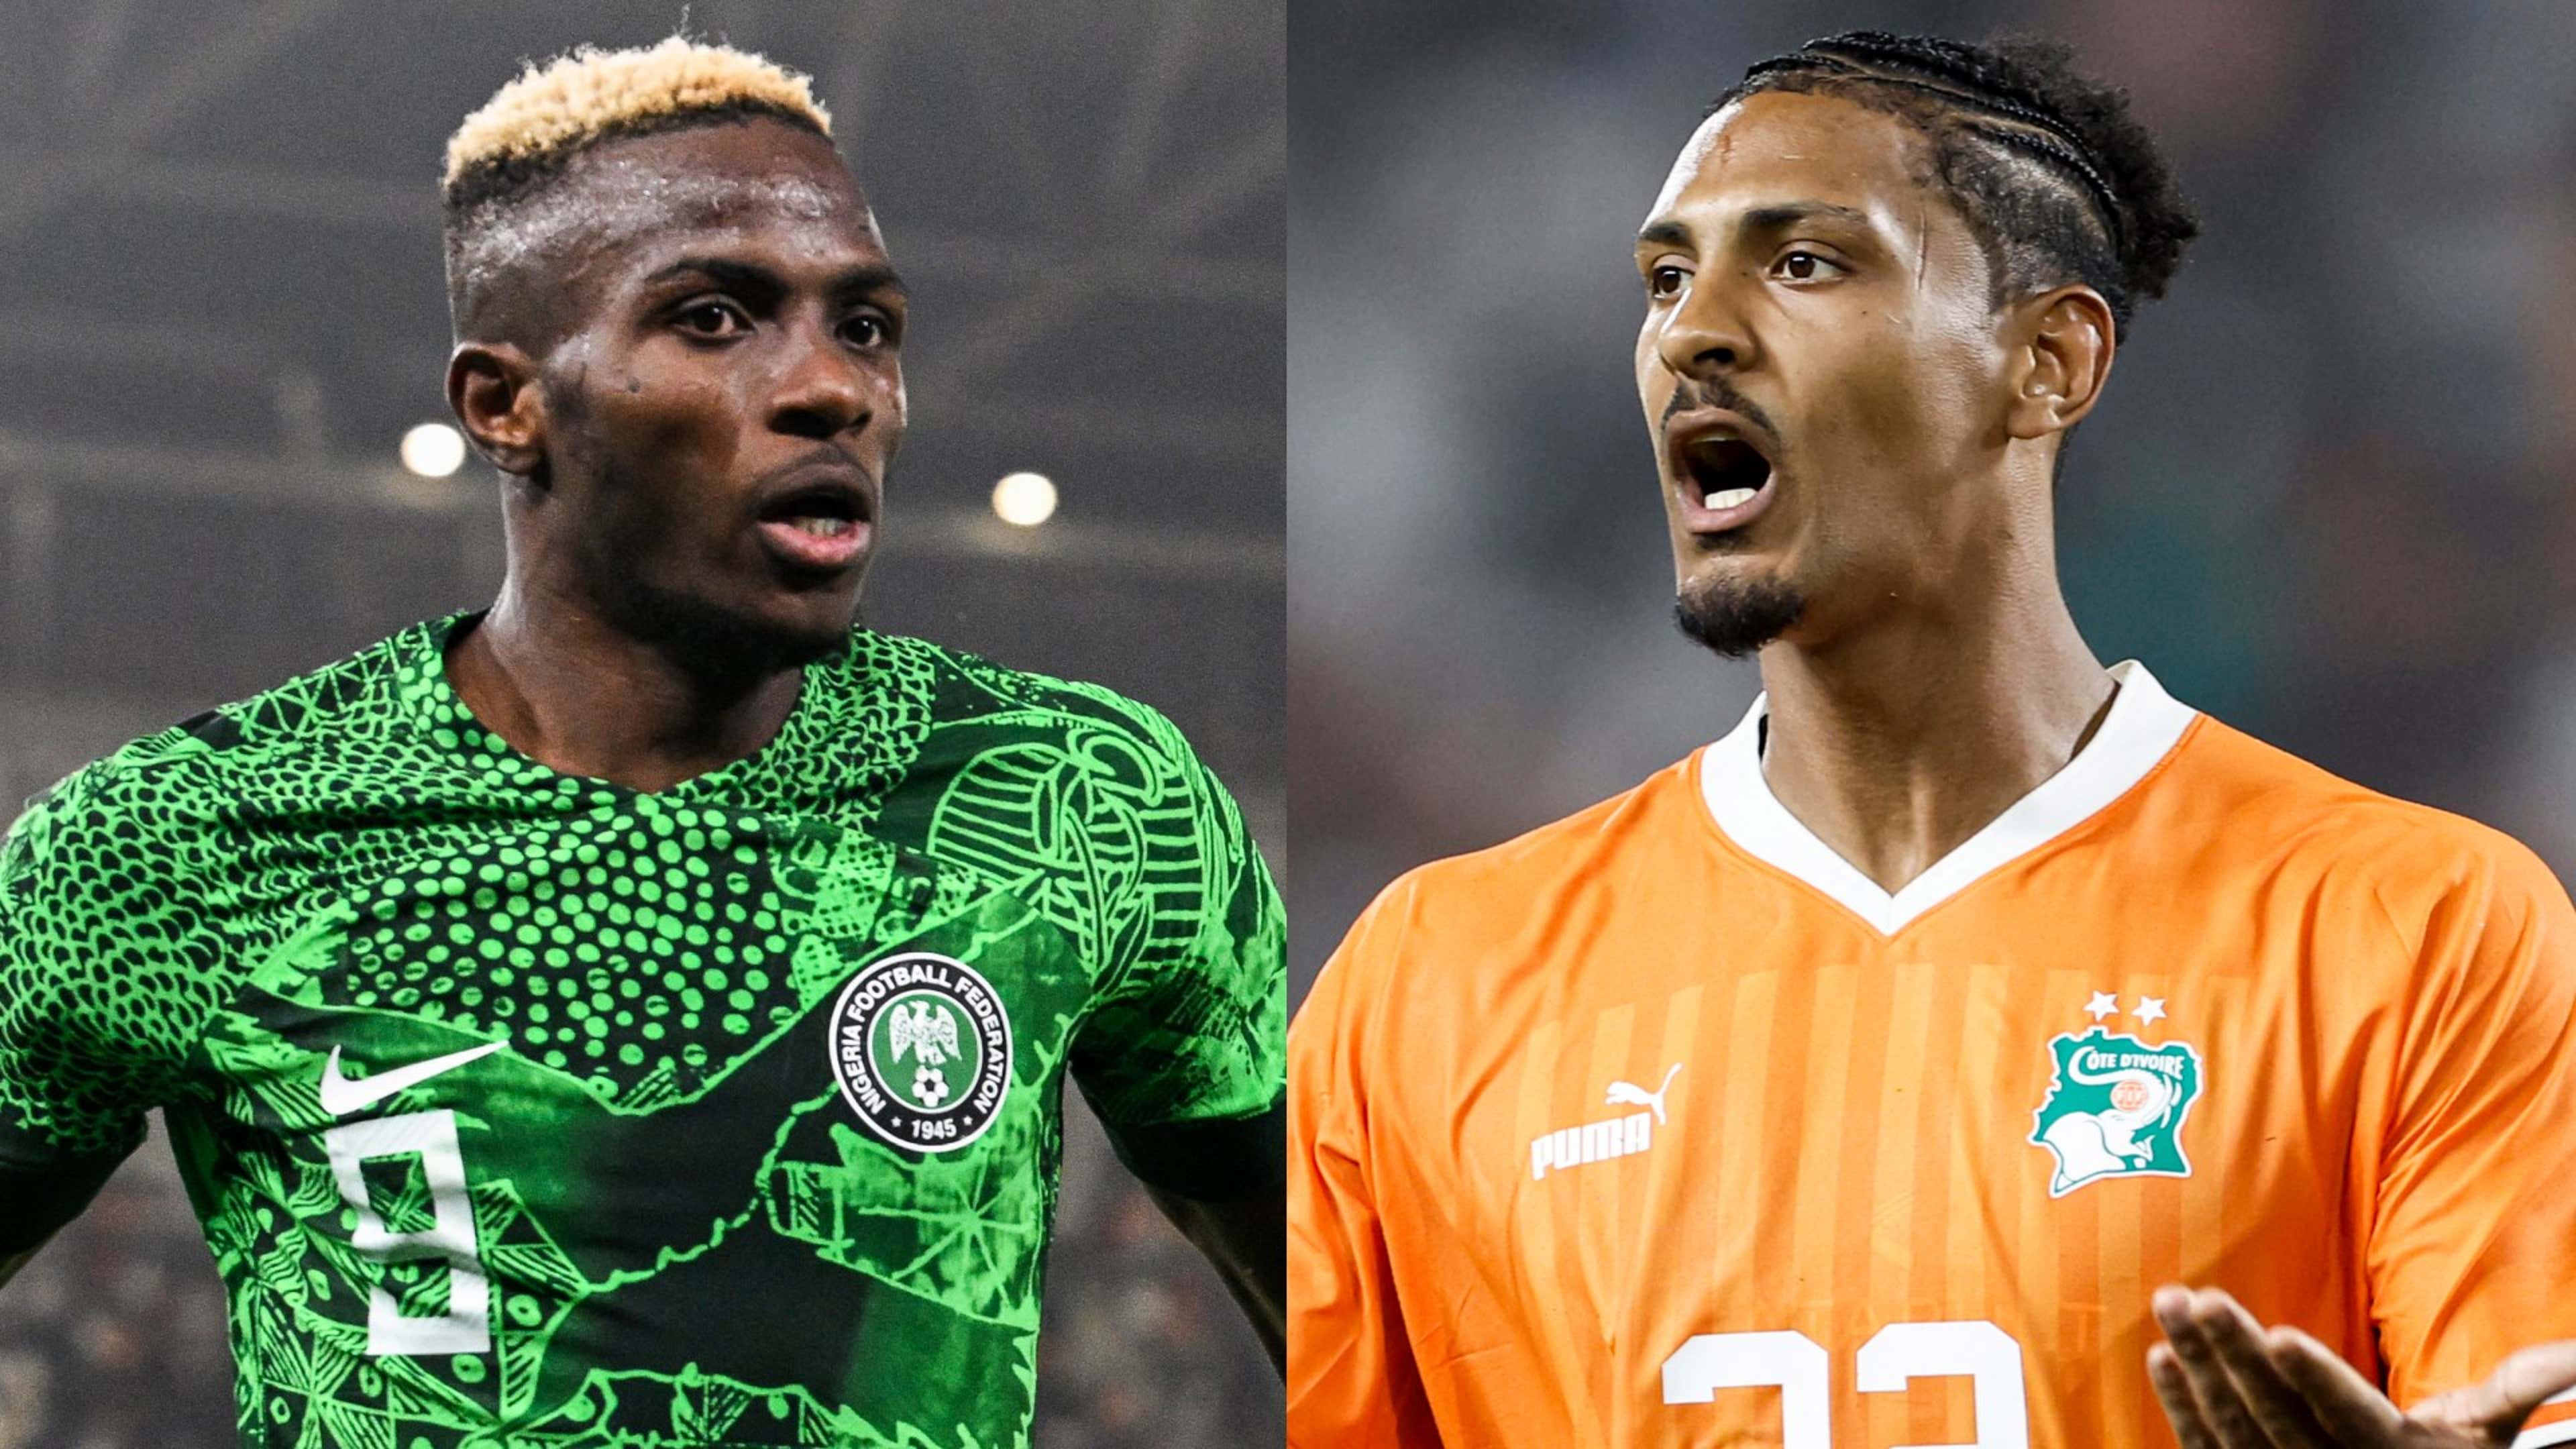 🔴 NIGERIA vs COTE D'IVOIRE - Africa Cup of Nations 2023 FINAL